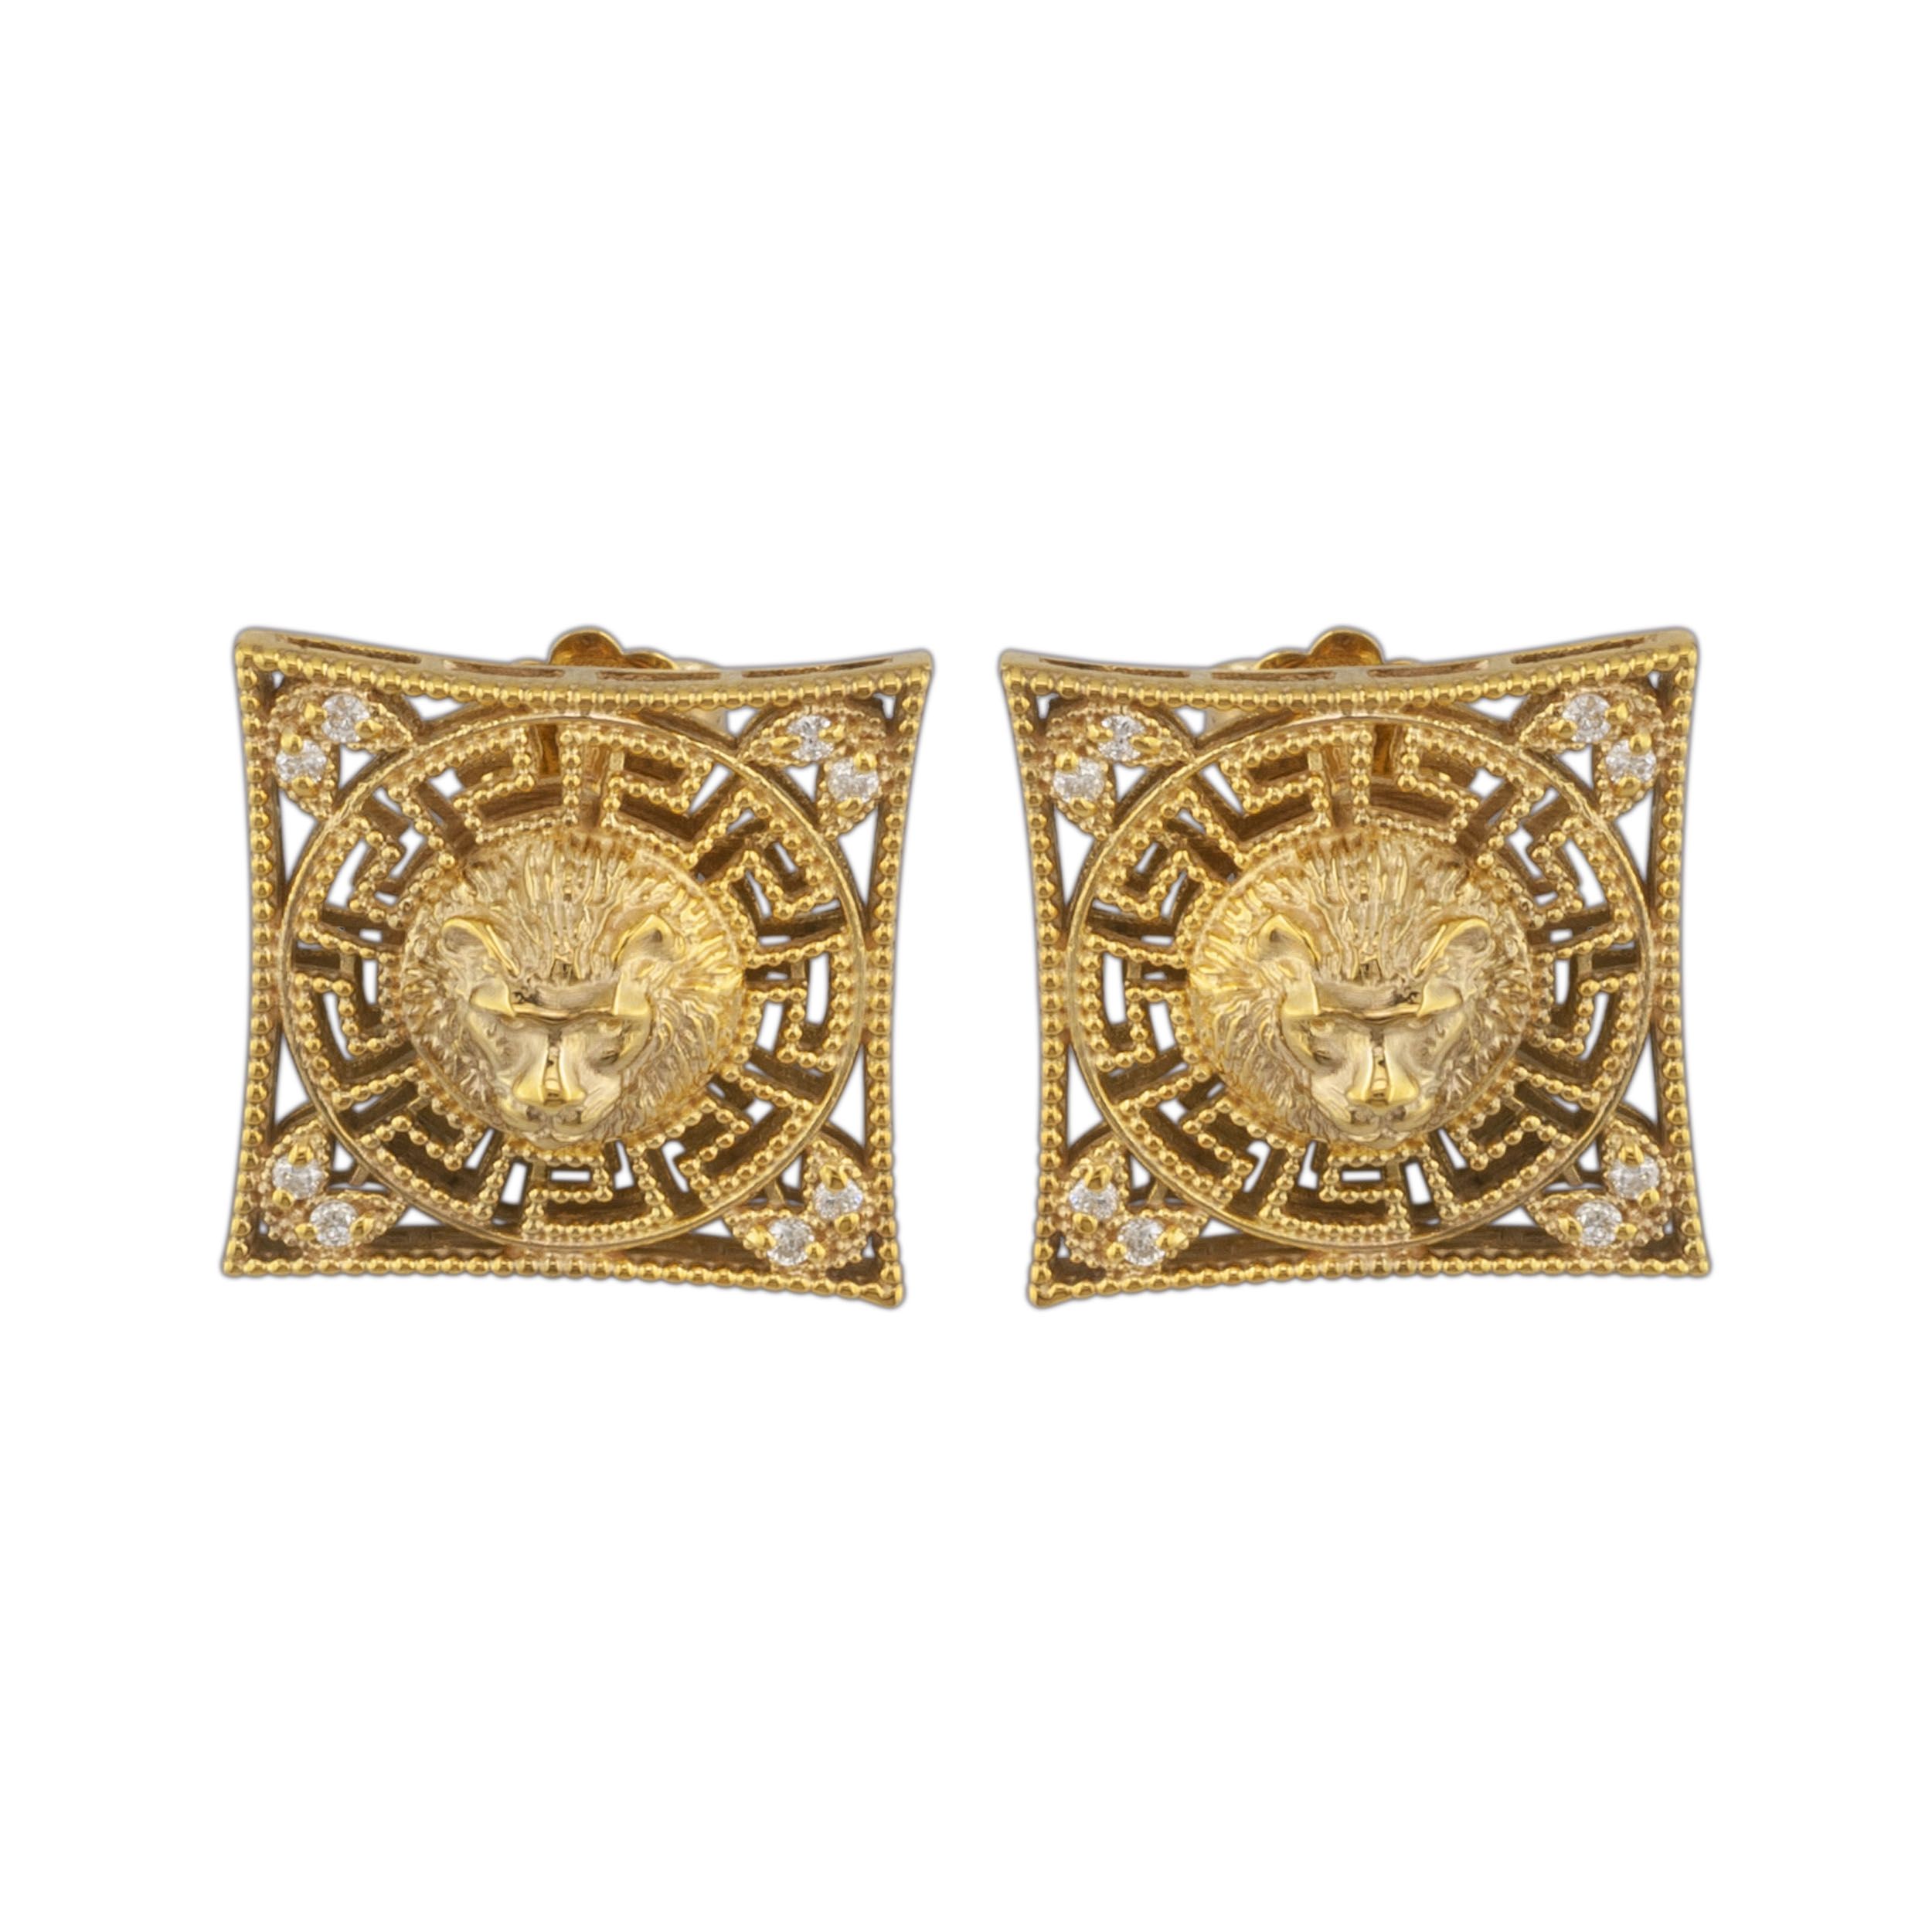 gold lion earrings with diamonds